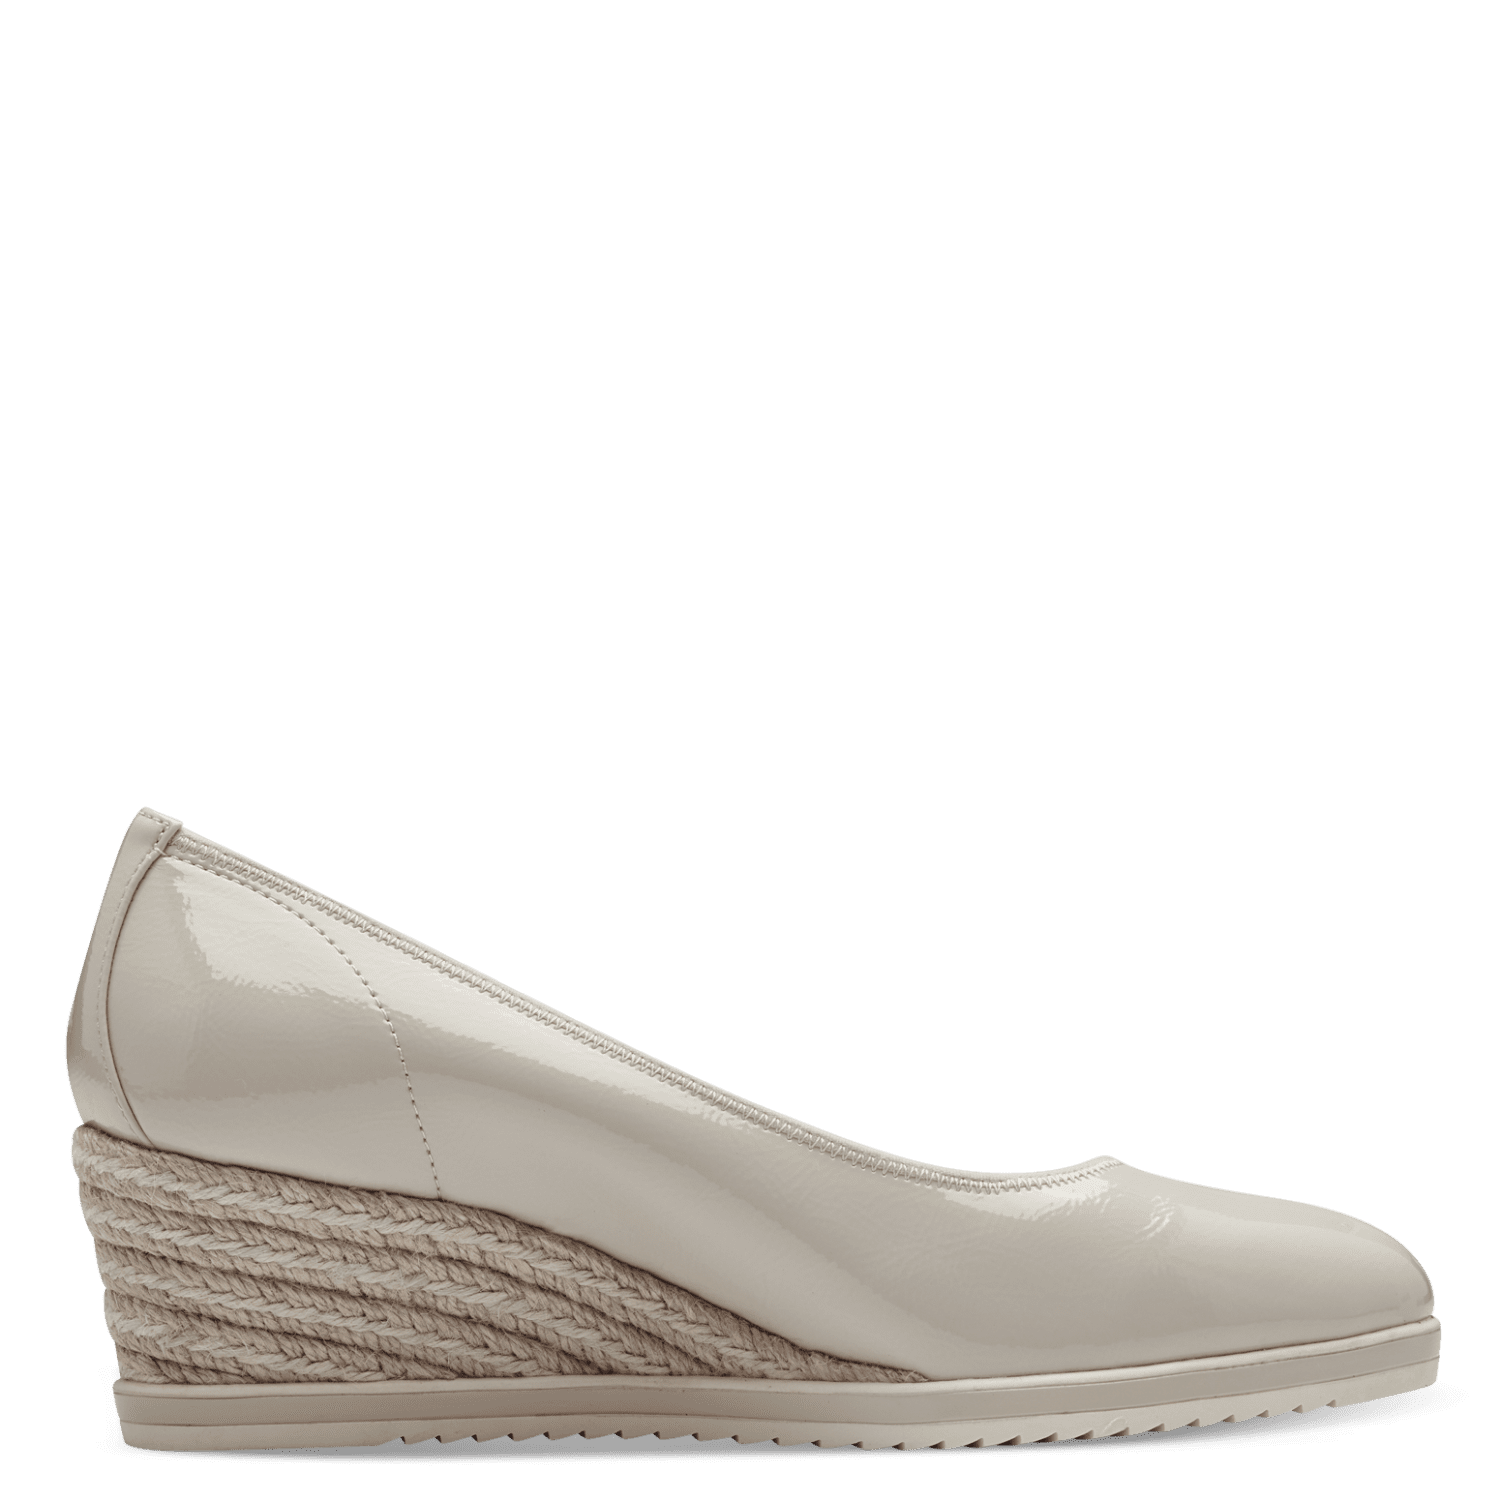  Side view of Tamaris wedge espadrille, highlighting the espadrille wedge and elastic edging for fit.